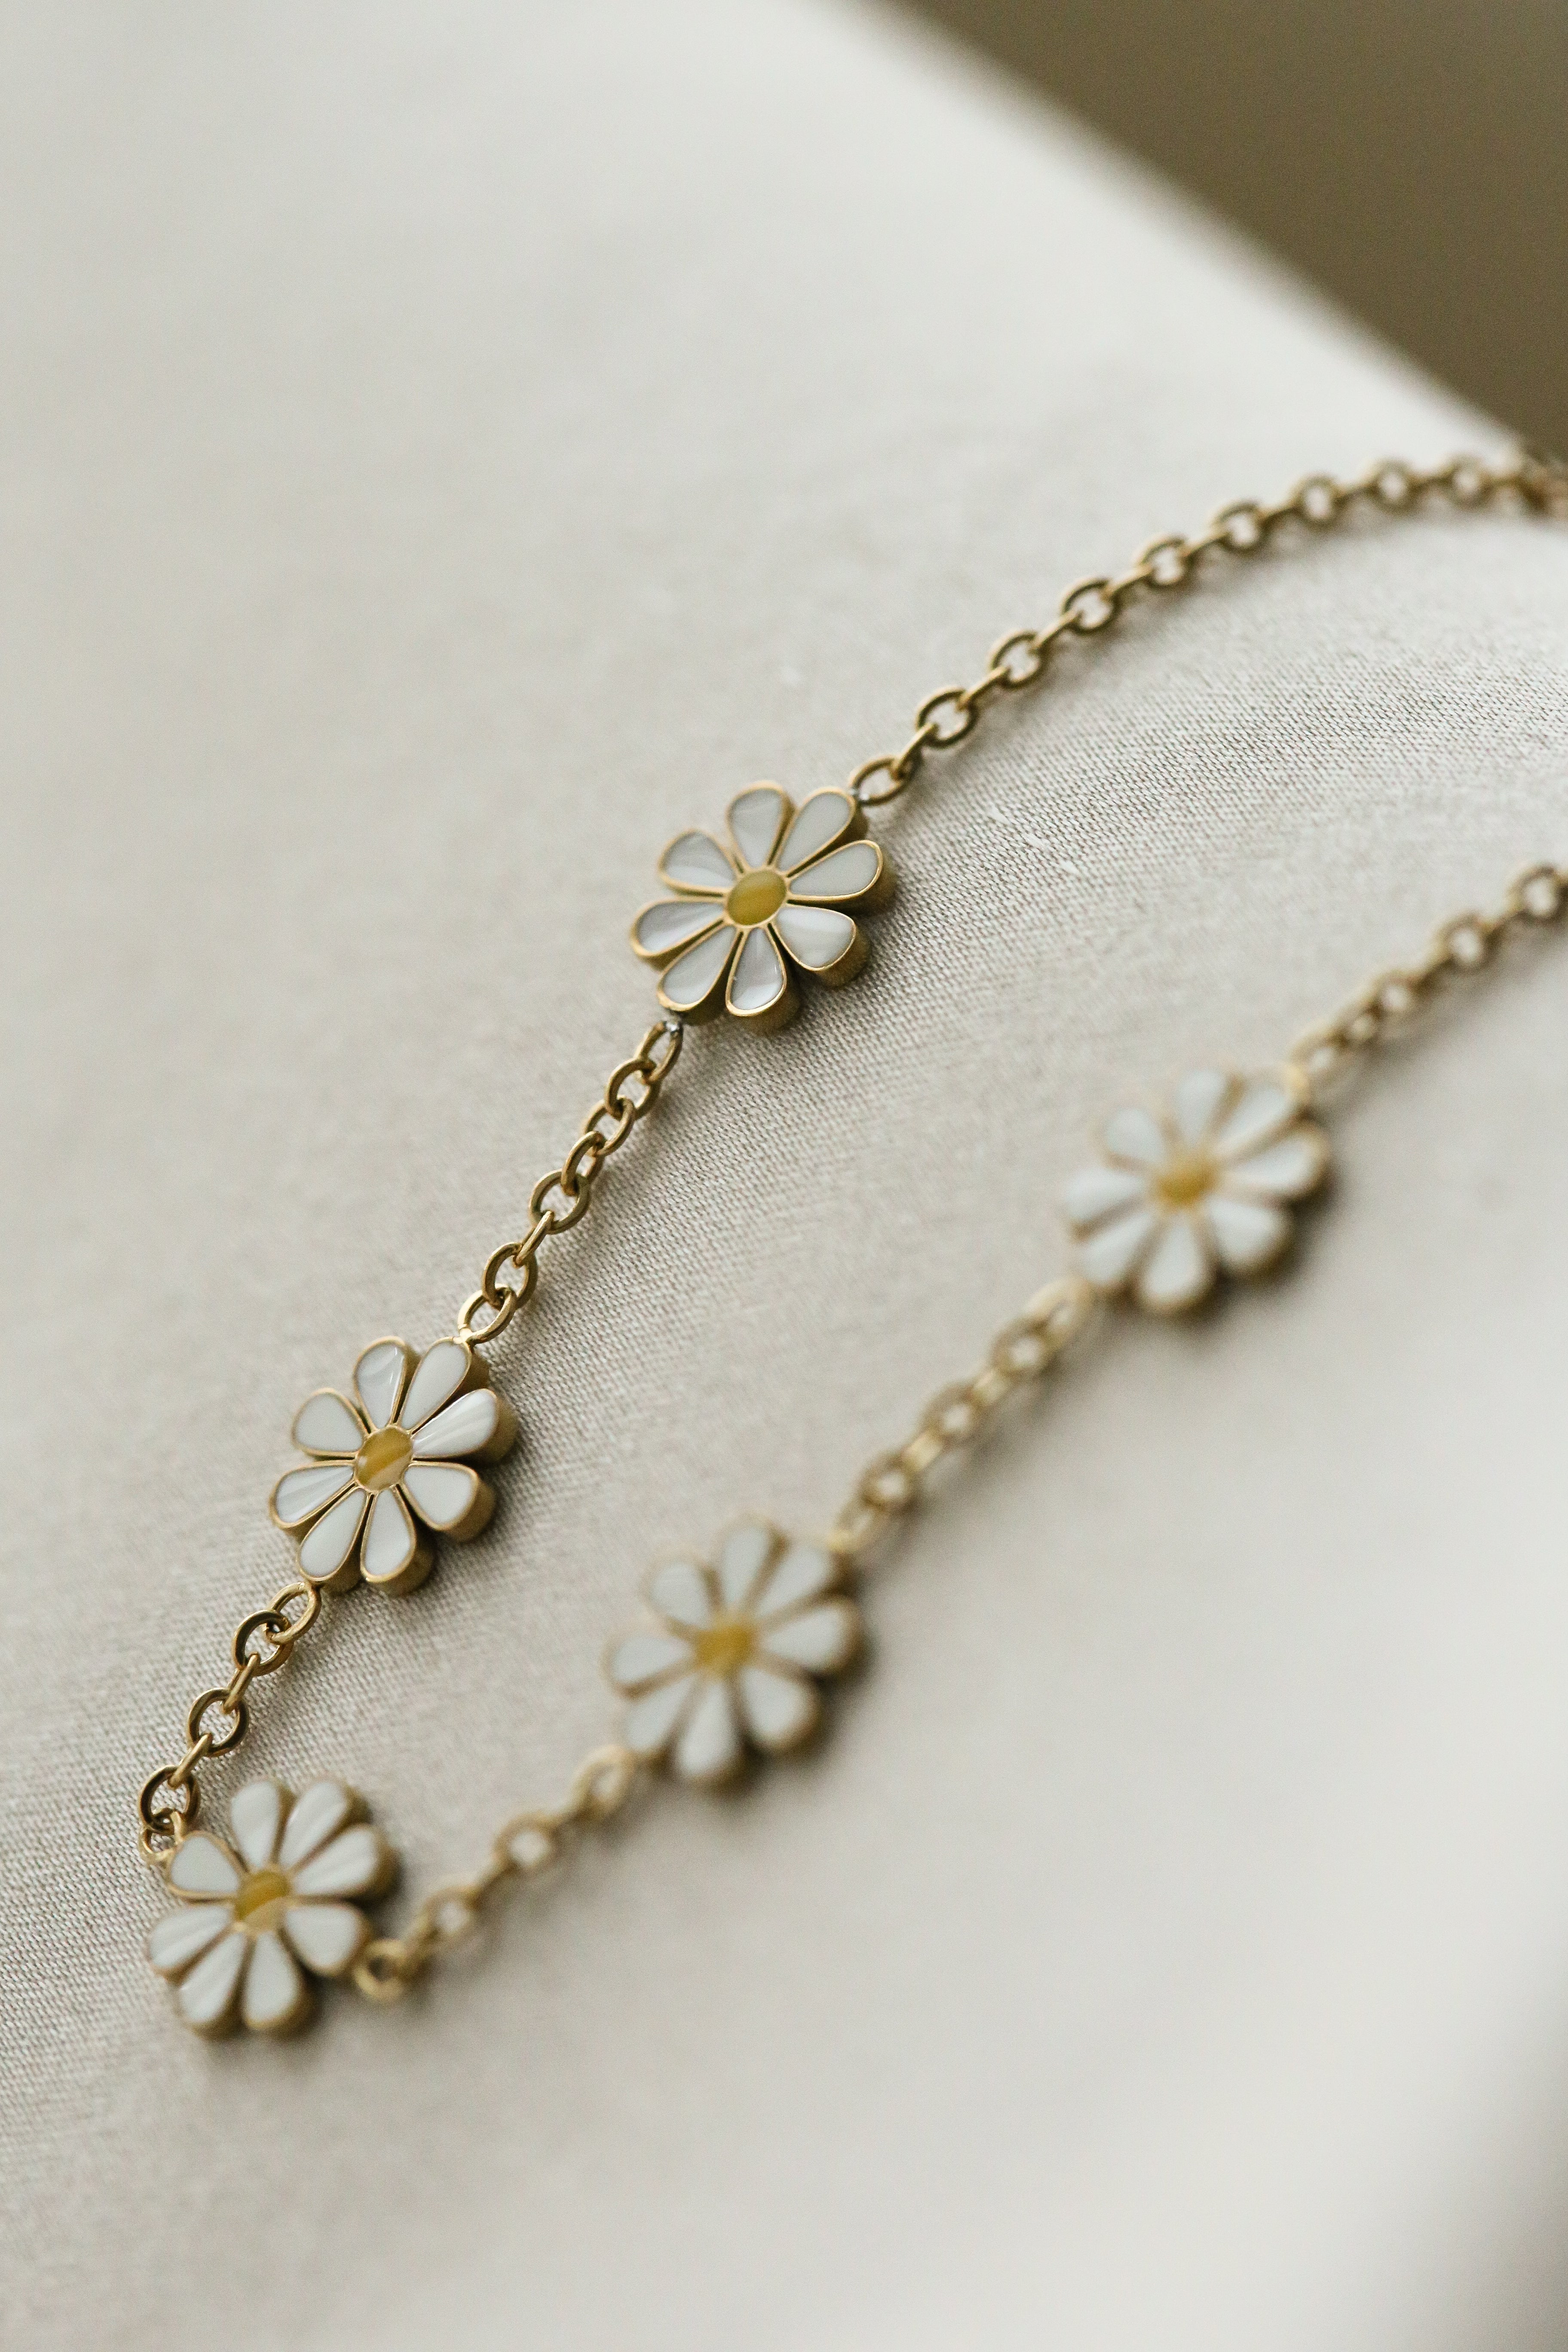 Valery (children) Necklace - Boutique Minimaliste has waterproof, durable, elegant and vintage inspired jewelry